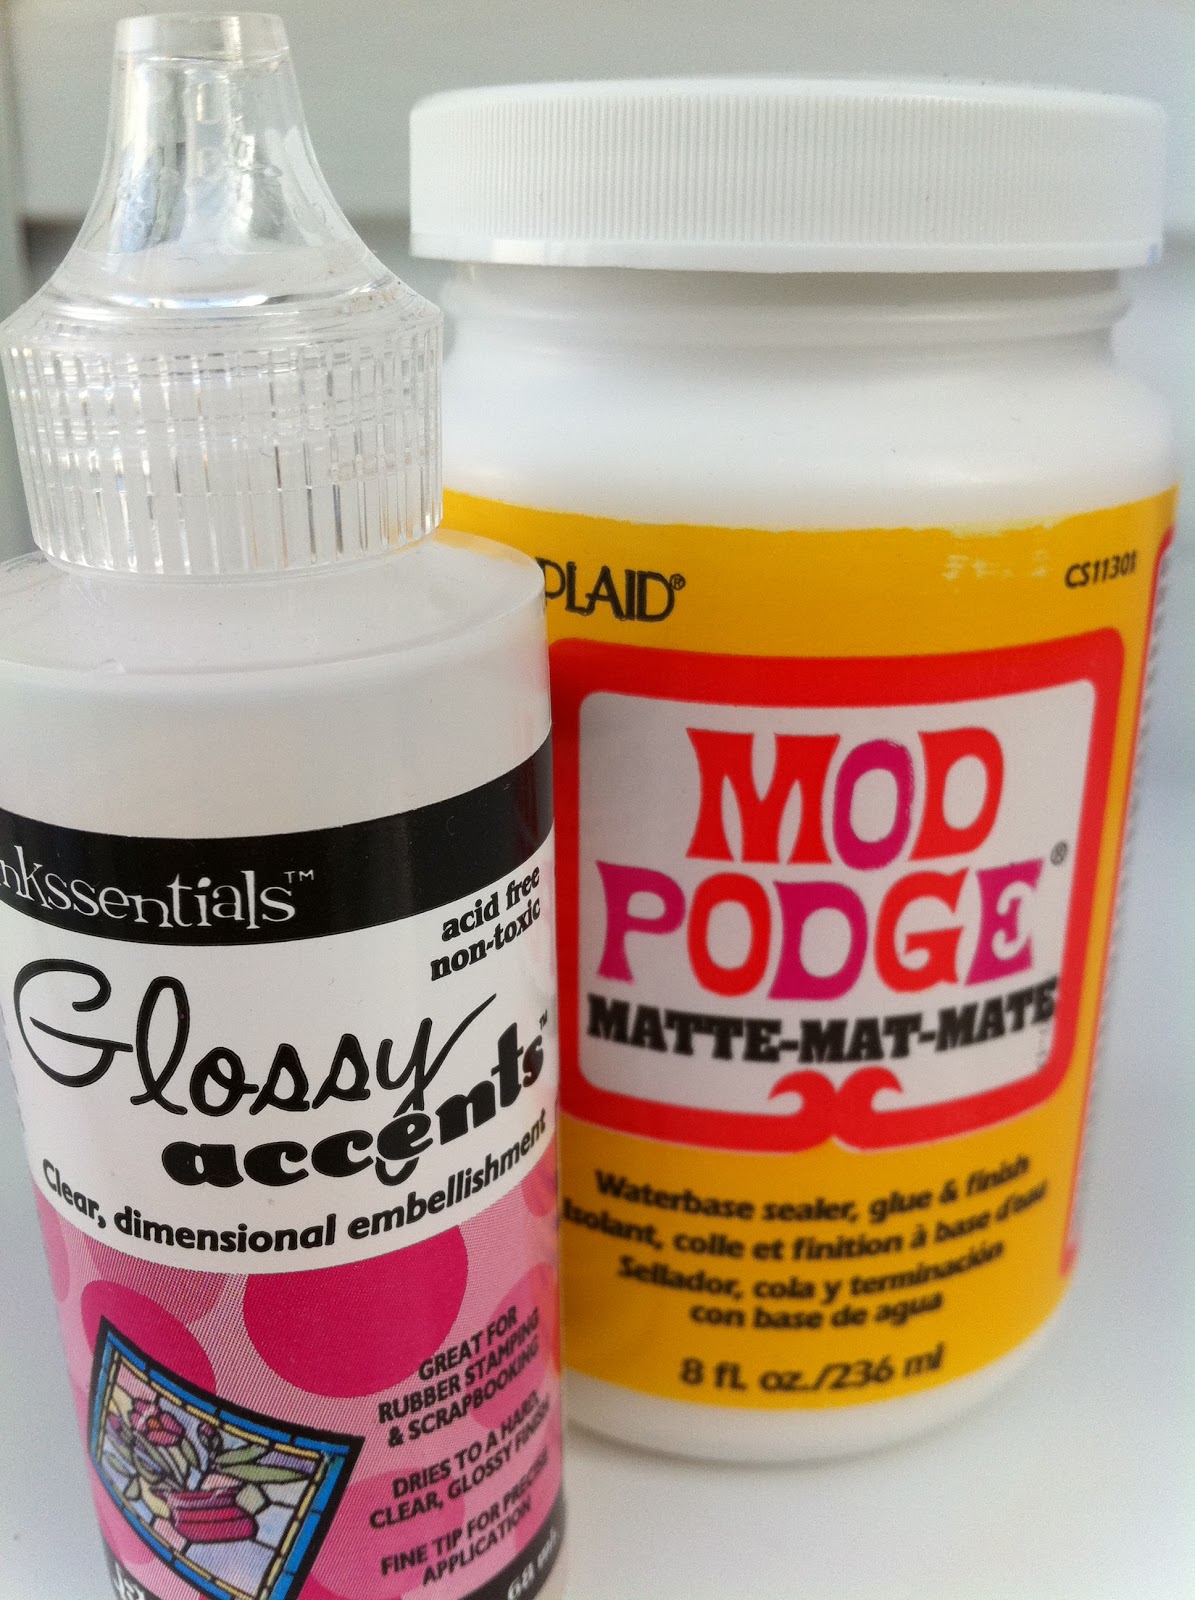 msds for 02916 mod podge art supplies from dick blick page 1 of 6 msds ...